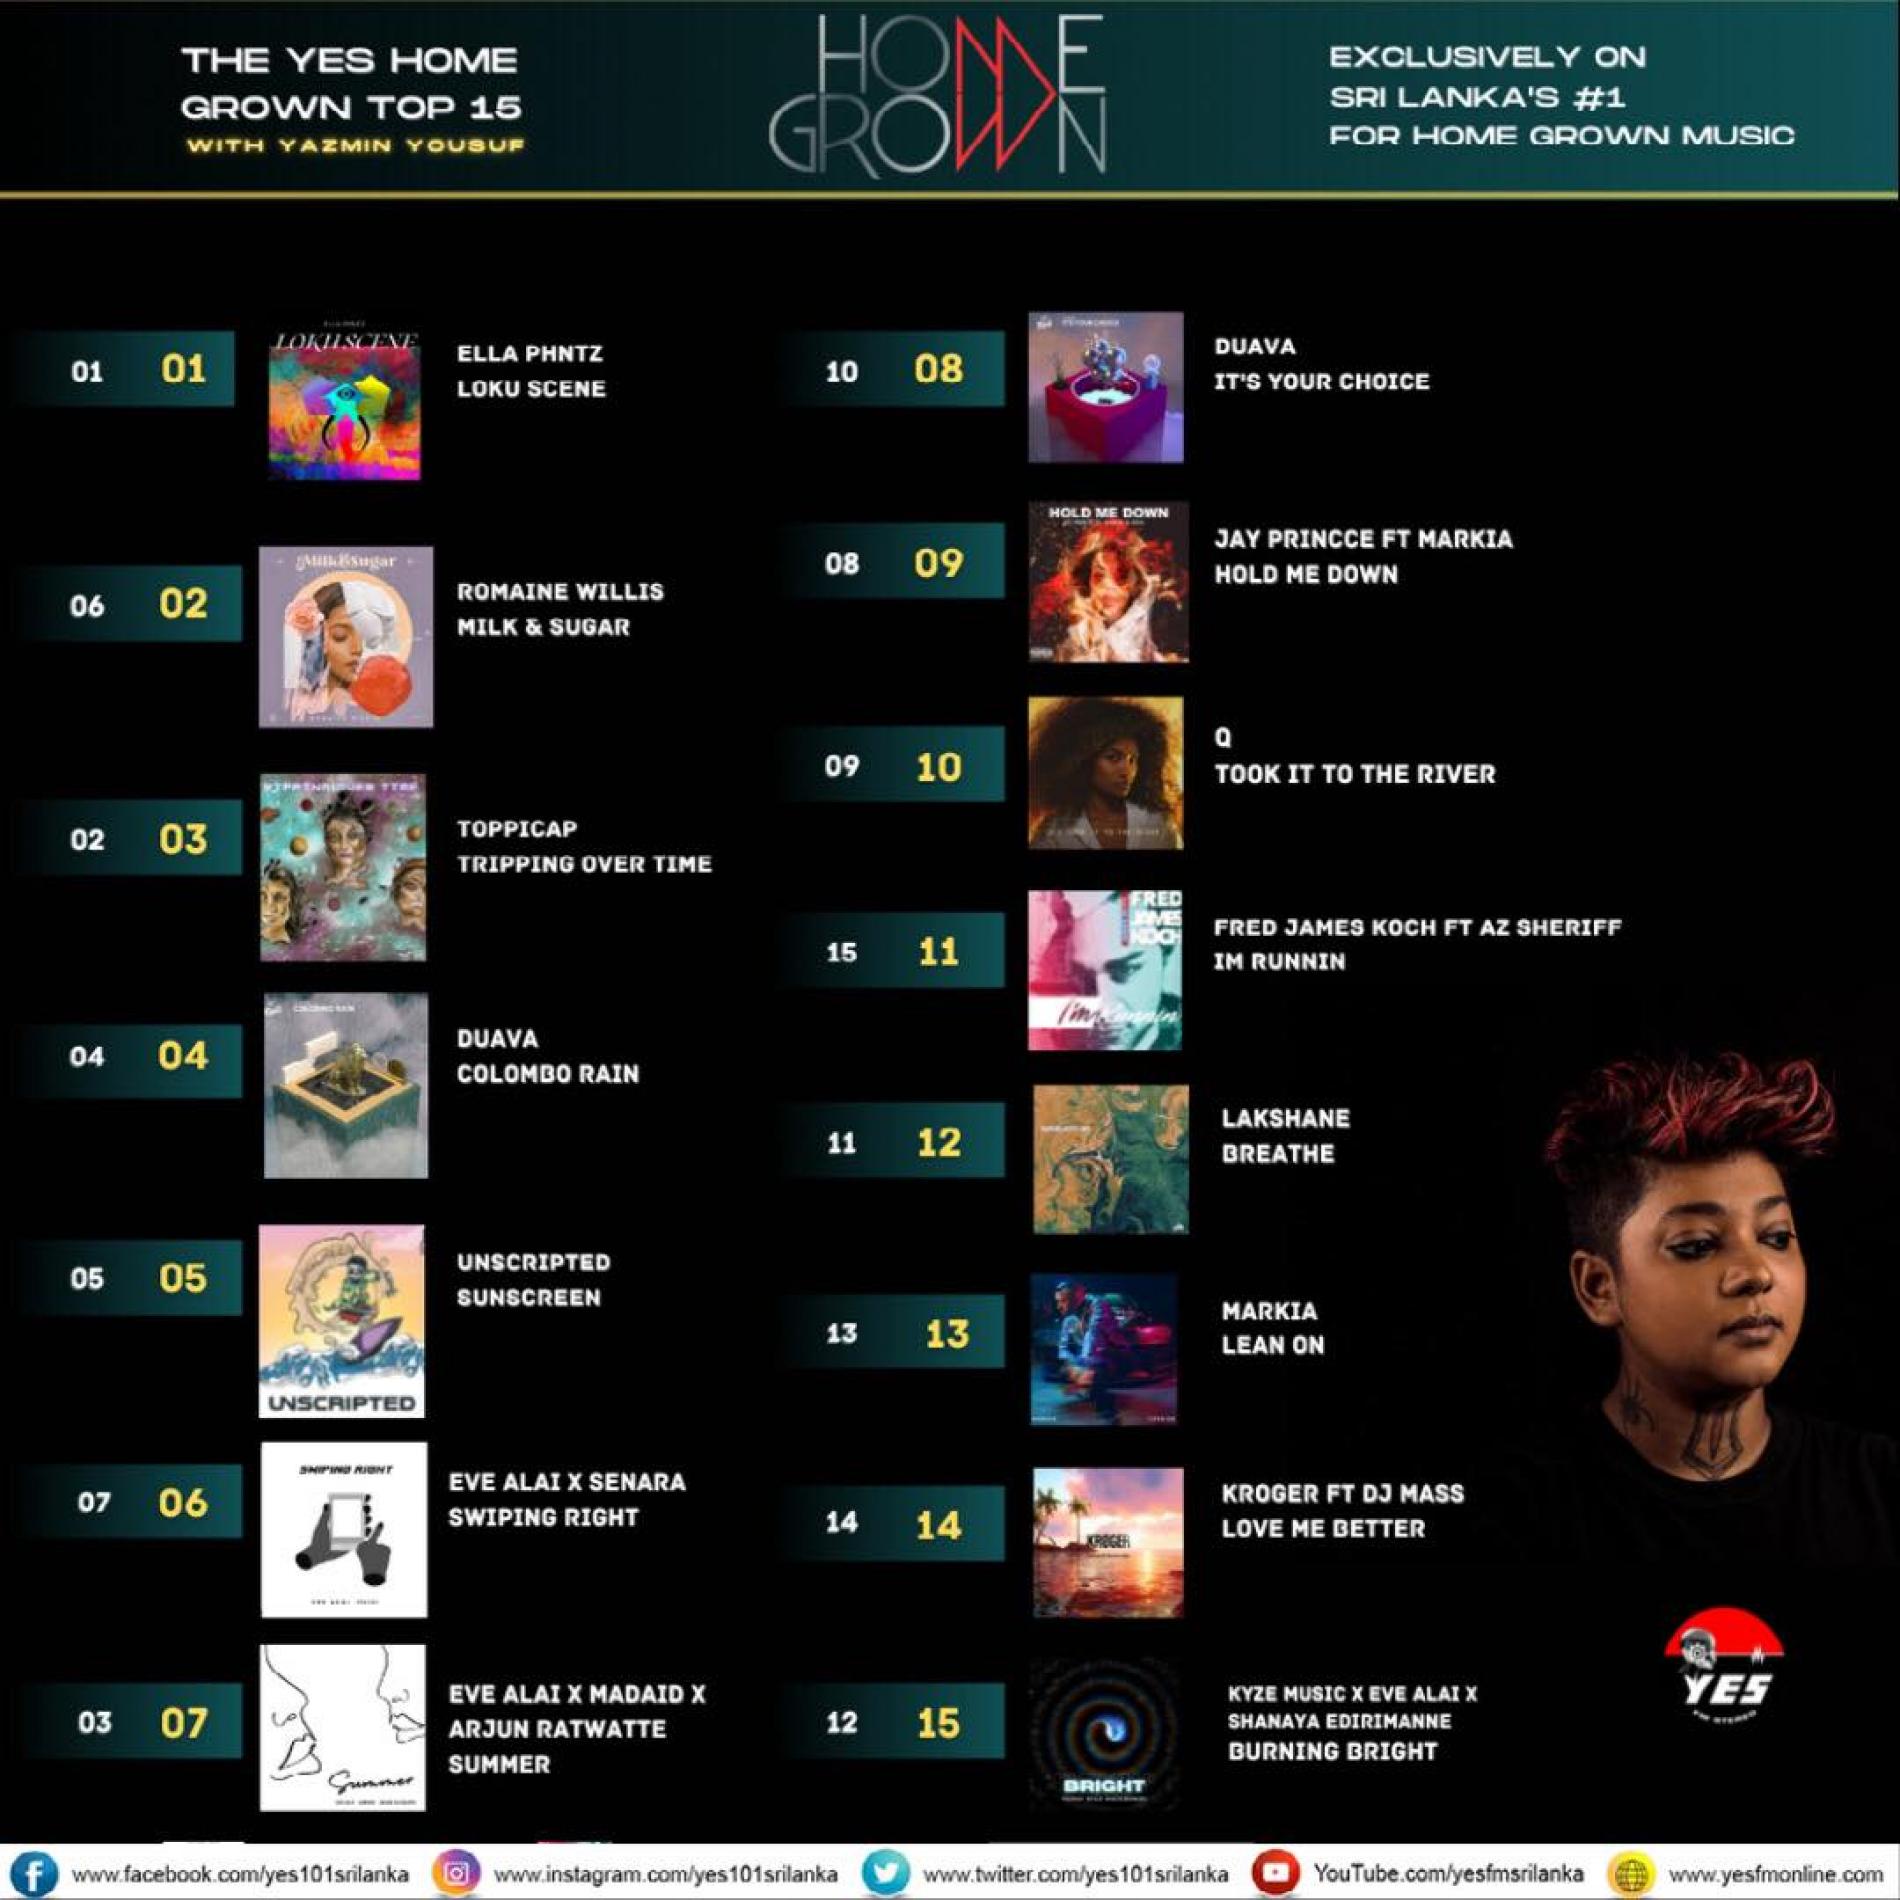 News : Ella Phntz Stay At Number 1 For A Second Week!